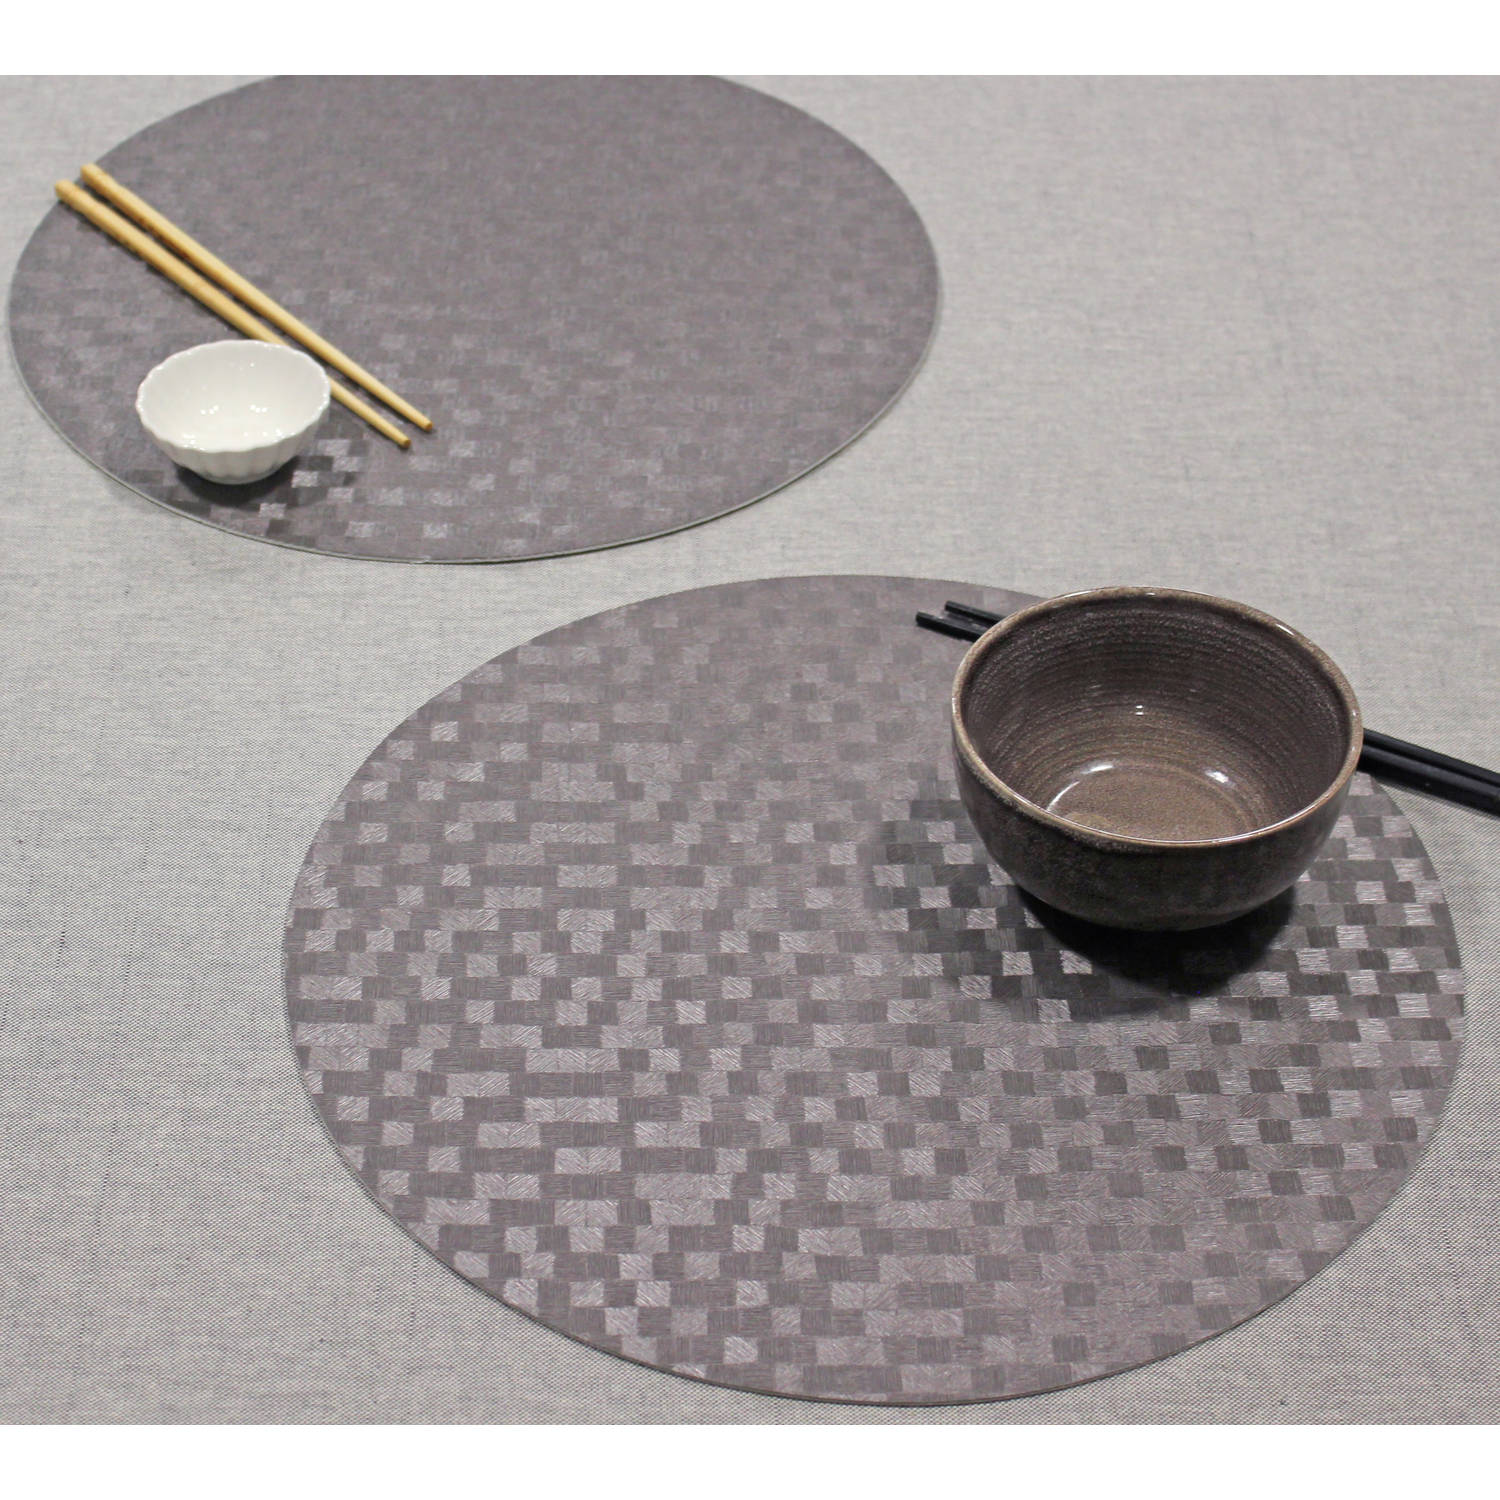 Wicotex-Placemats Dijon stone-rond-Placemat easy to clean 12stuks